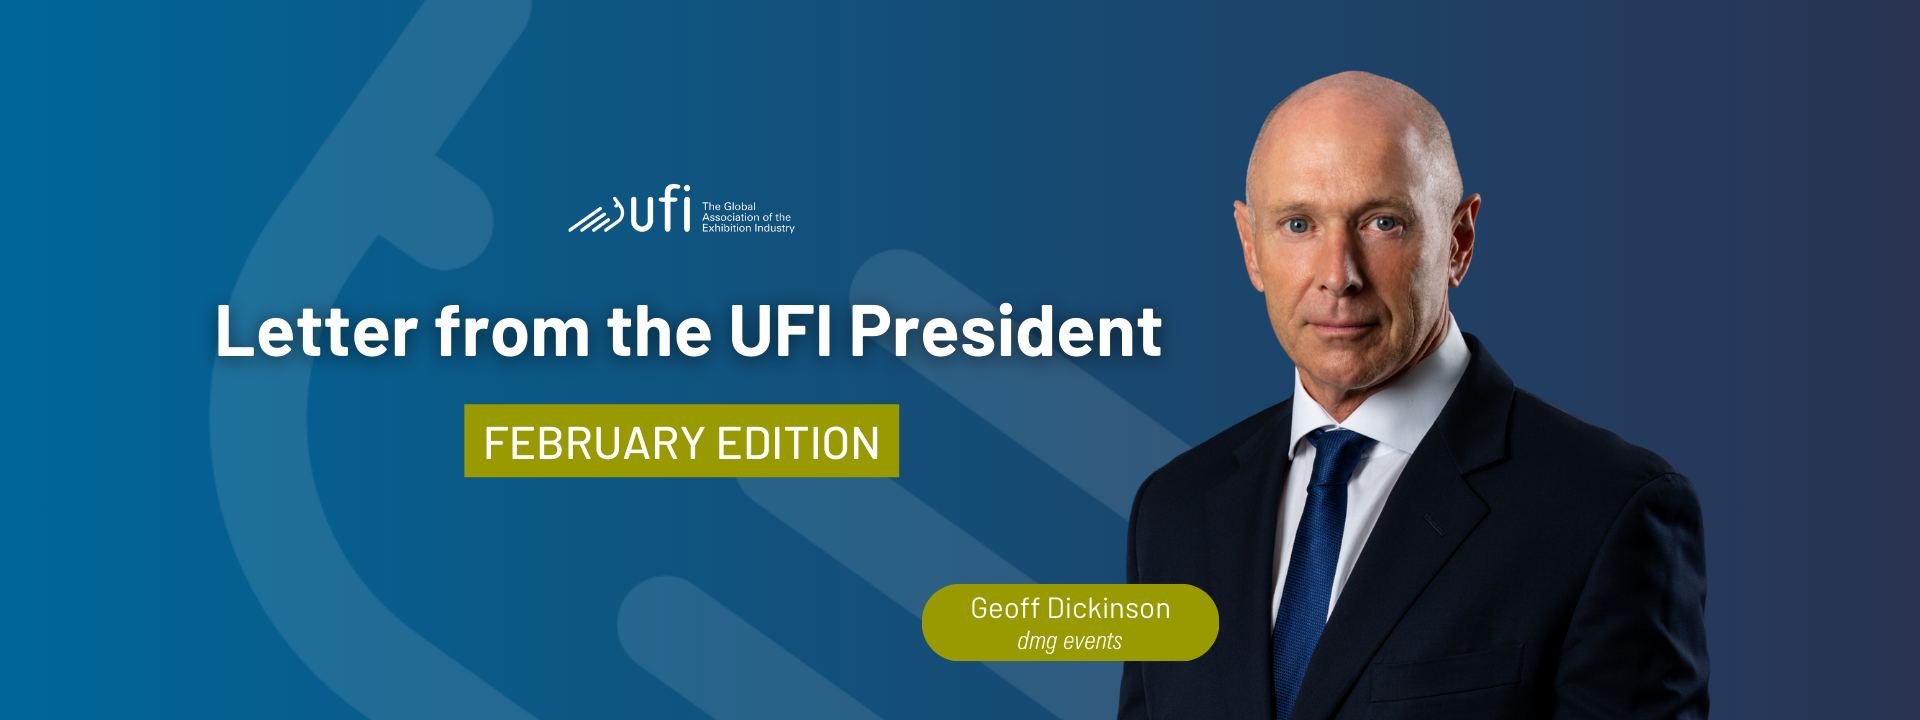 Letter from the UFI President: February edition